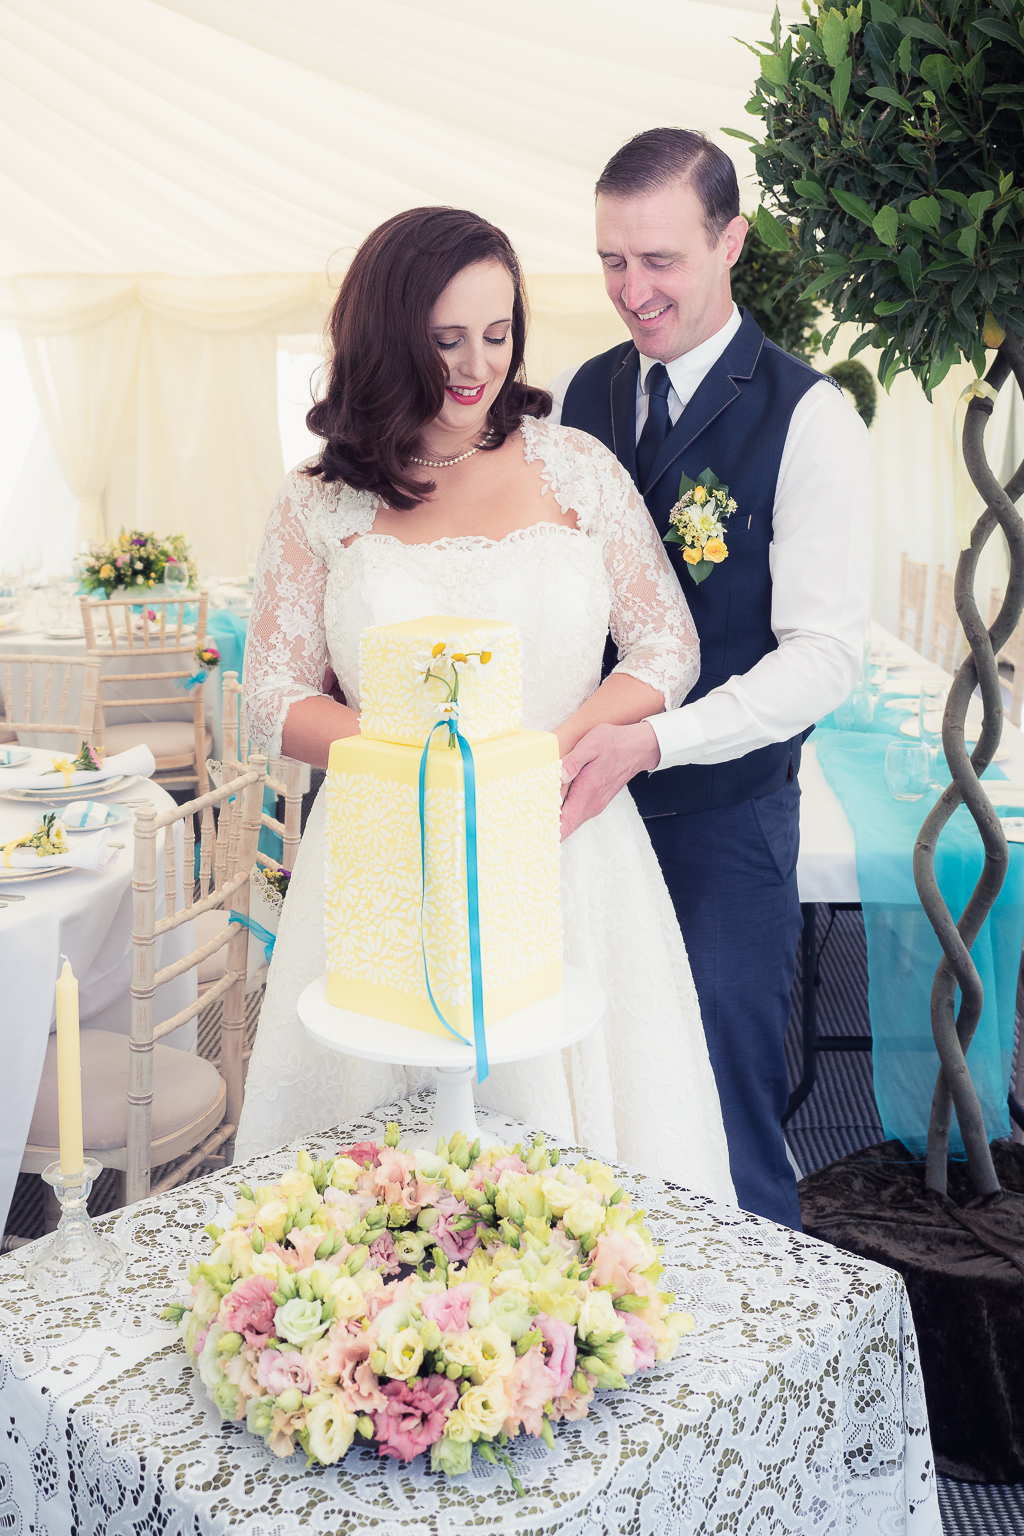 Traditional vintage styled wedding photoshoot at The Orangery Suite, photographer credit Dom Brenton Photography (46)